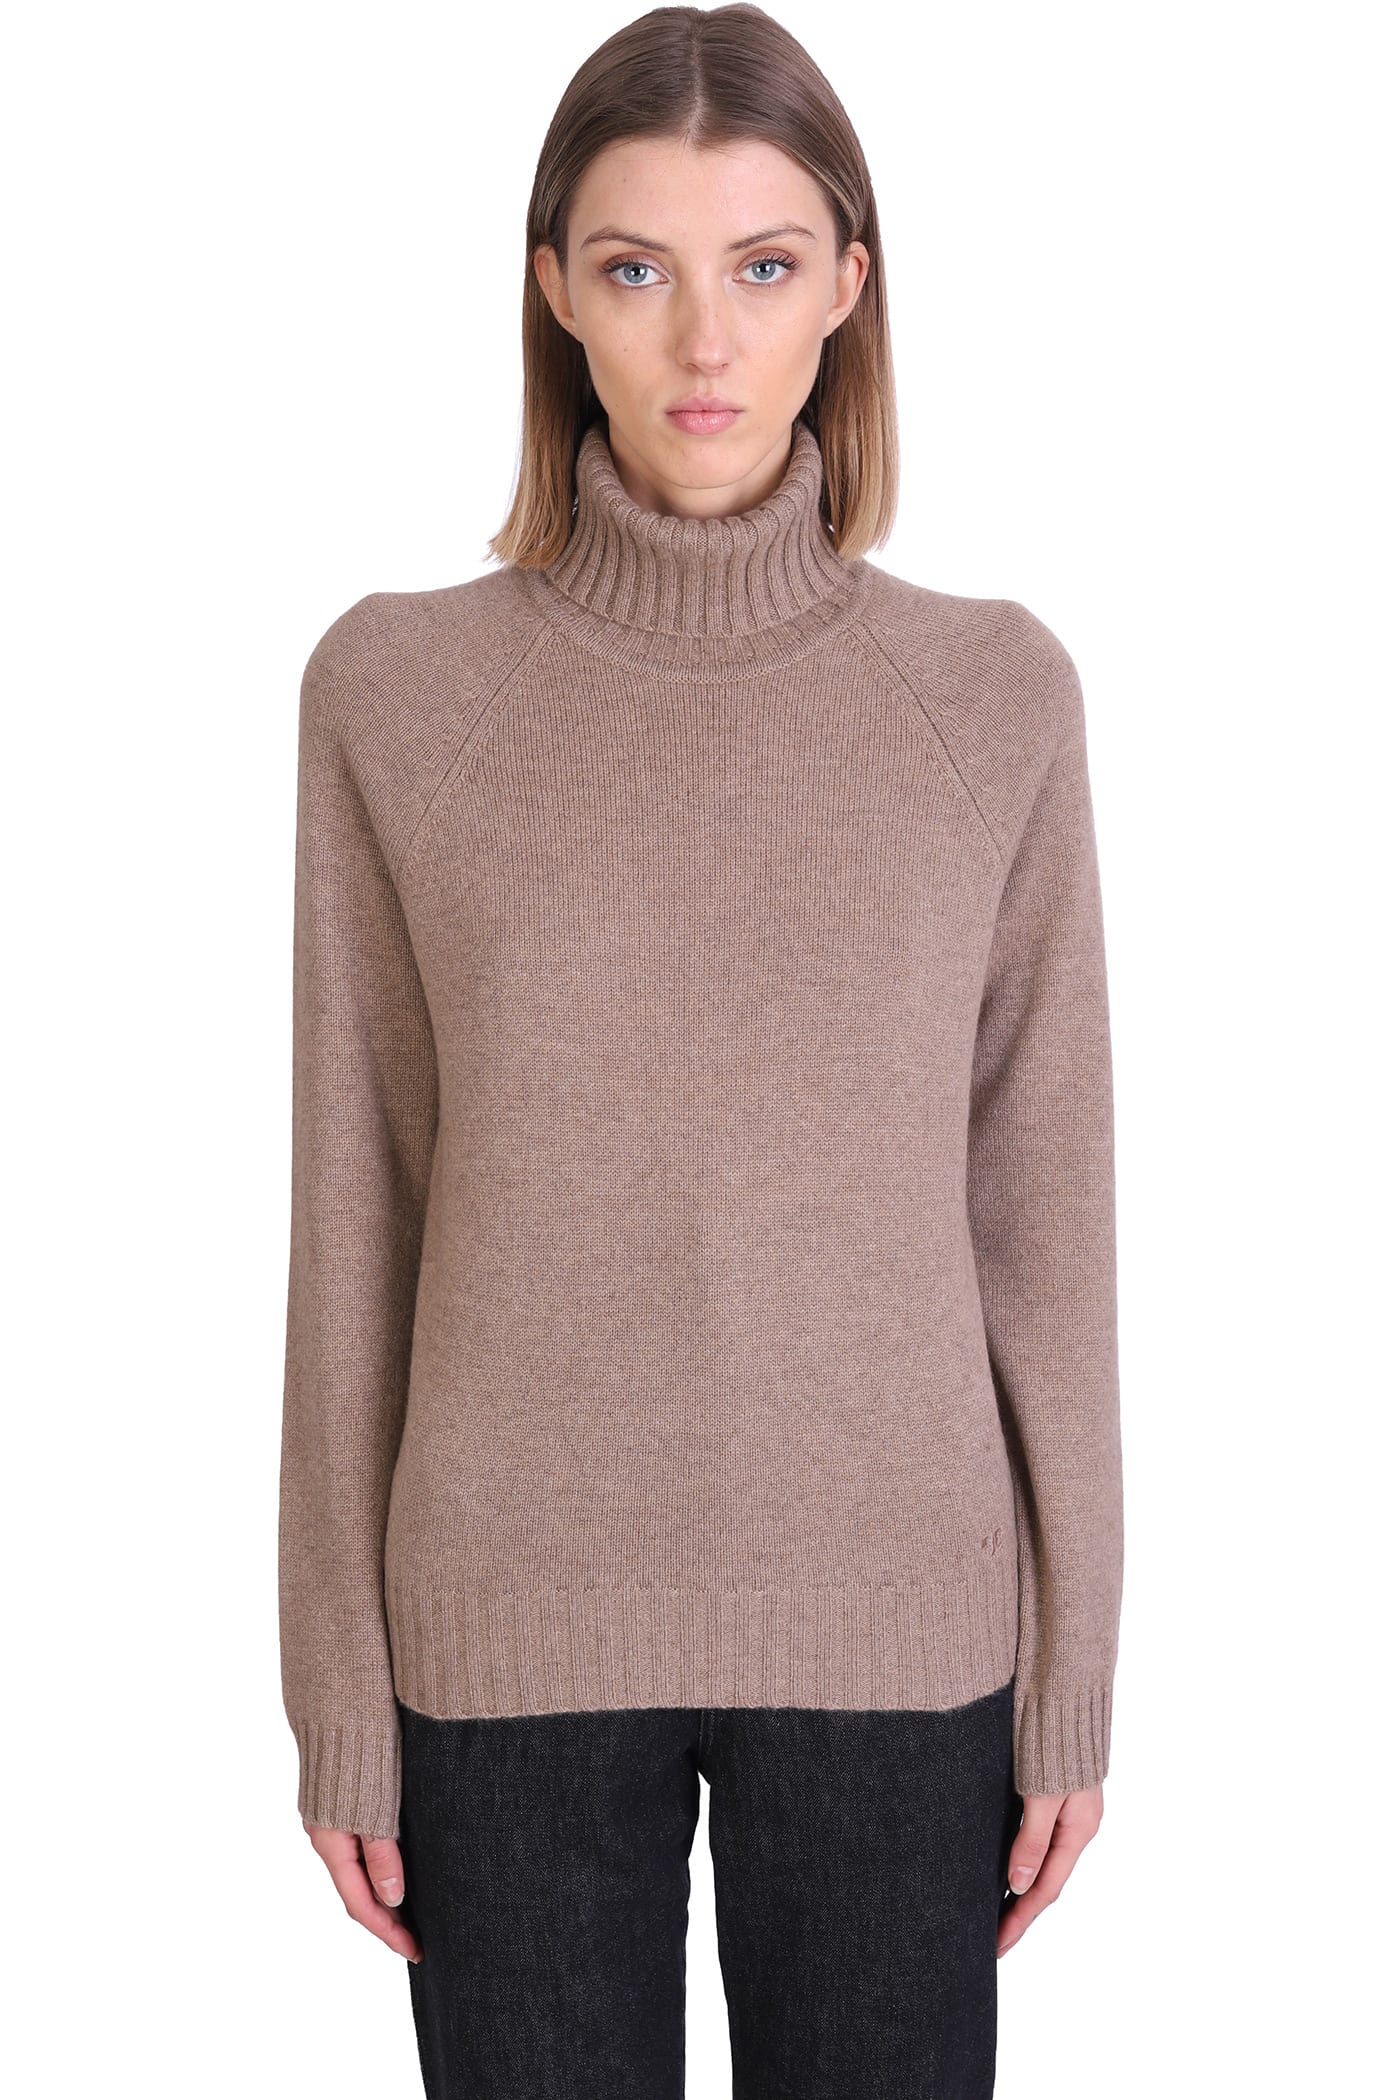 Tory Burch Knitwear In Brown Cashmere